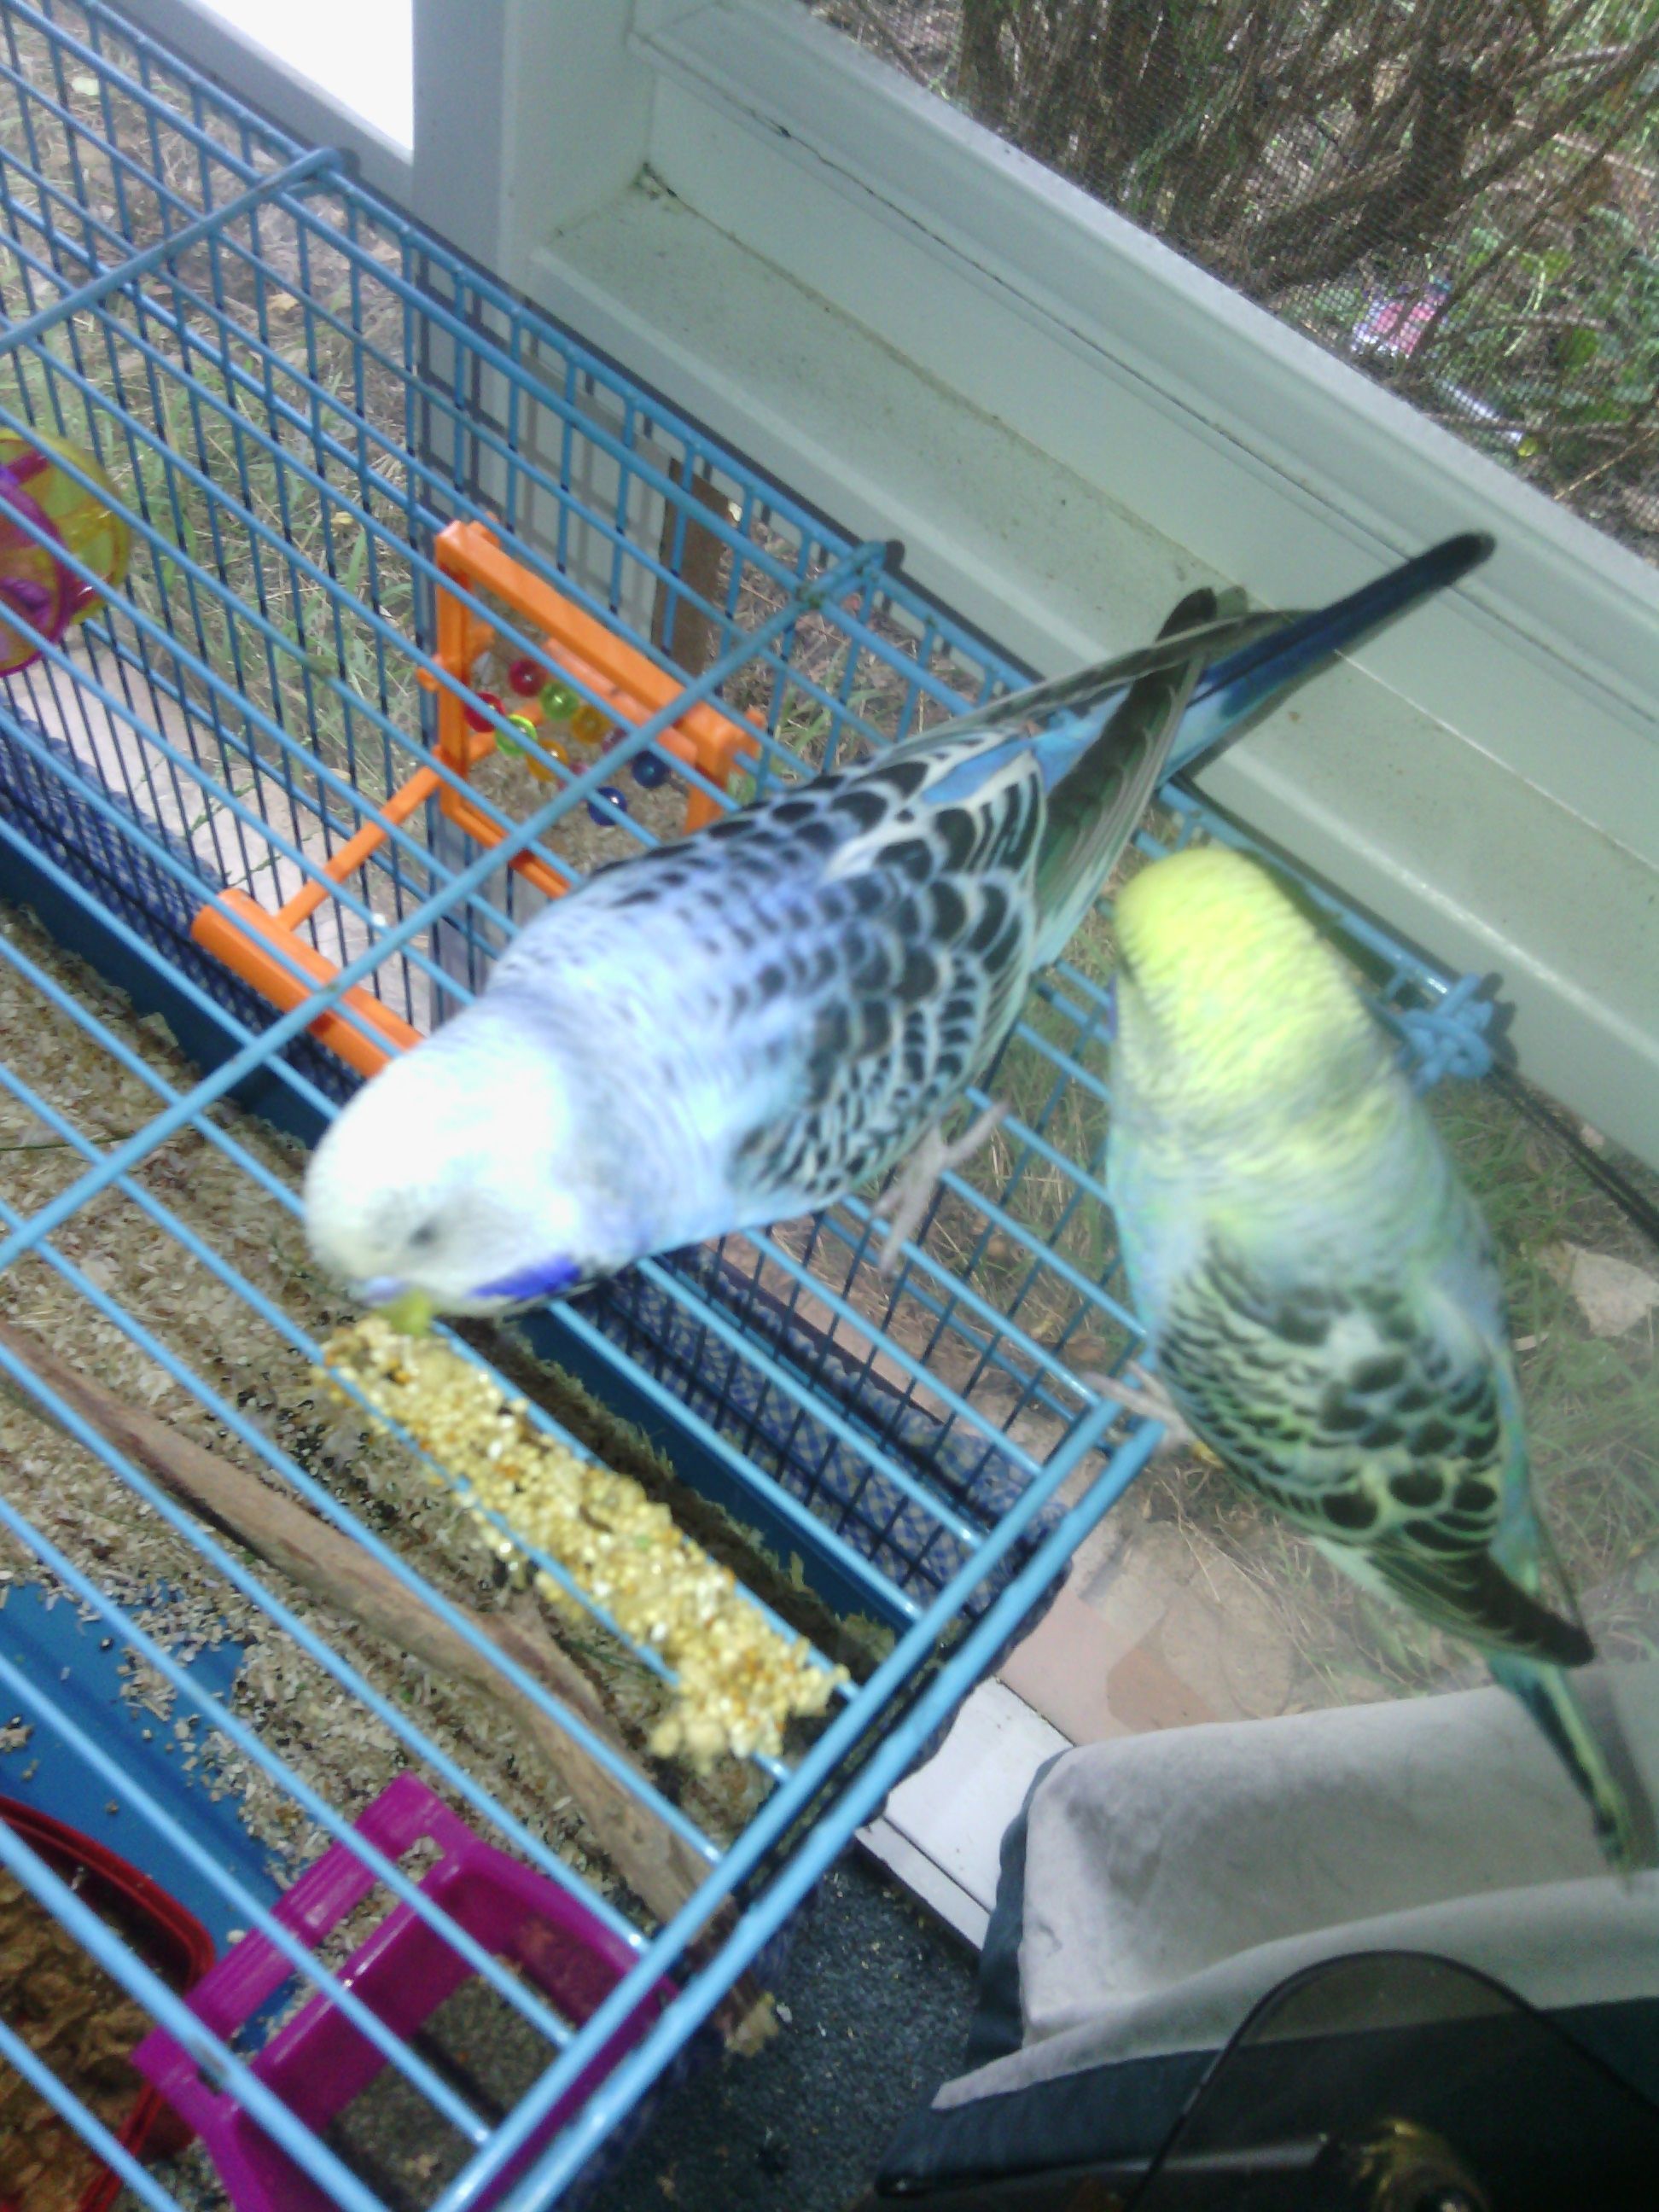 Two of my budgies Leo (blue) and Biscuit (yellow and green) exploring millet sprays!